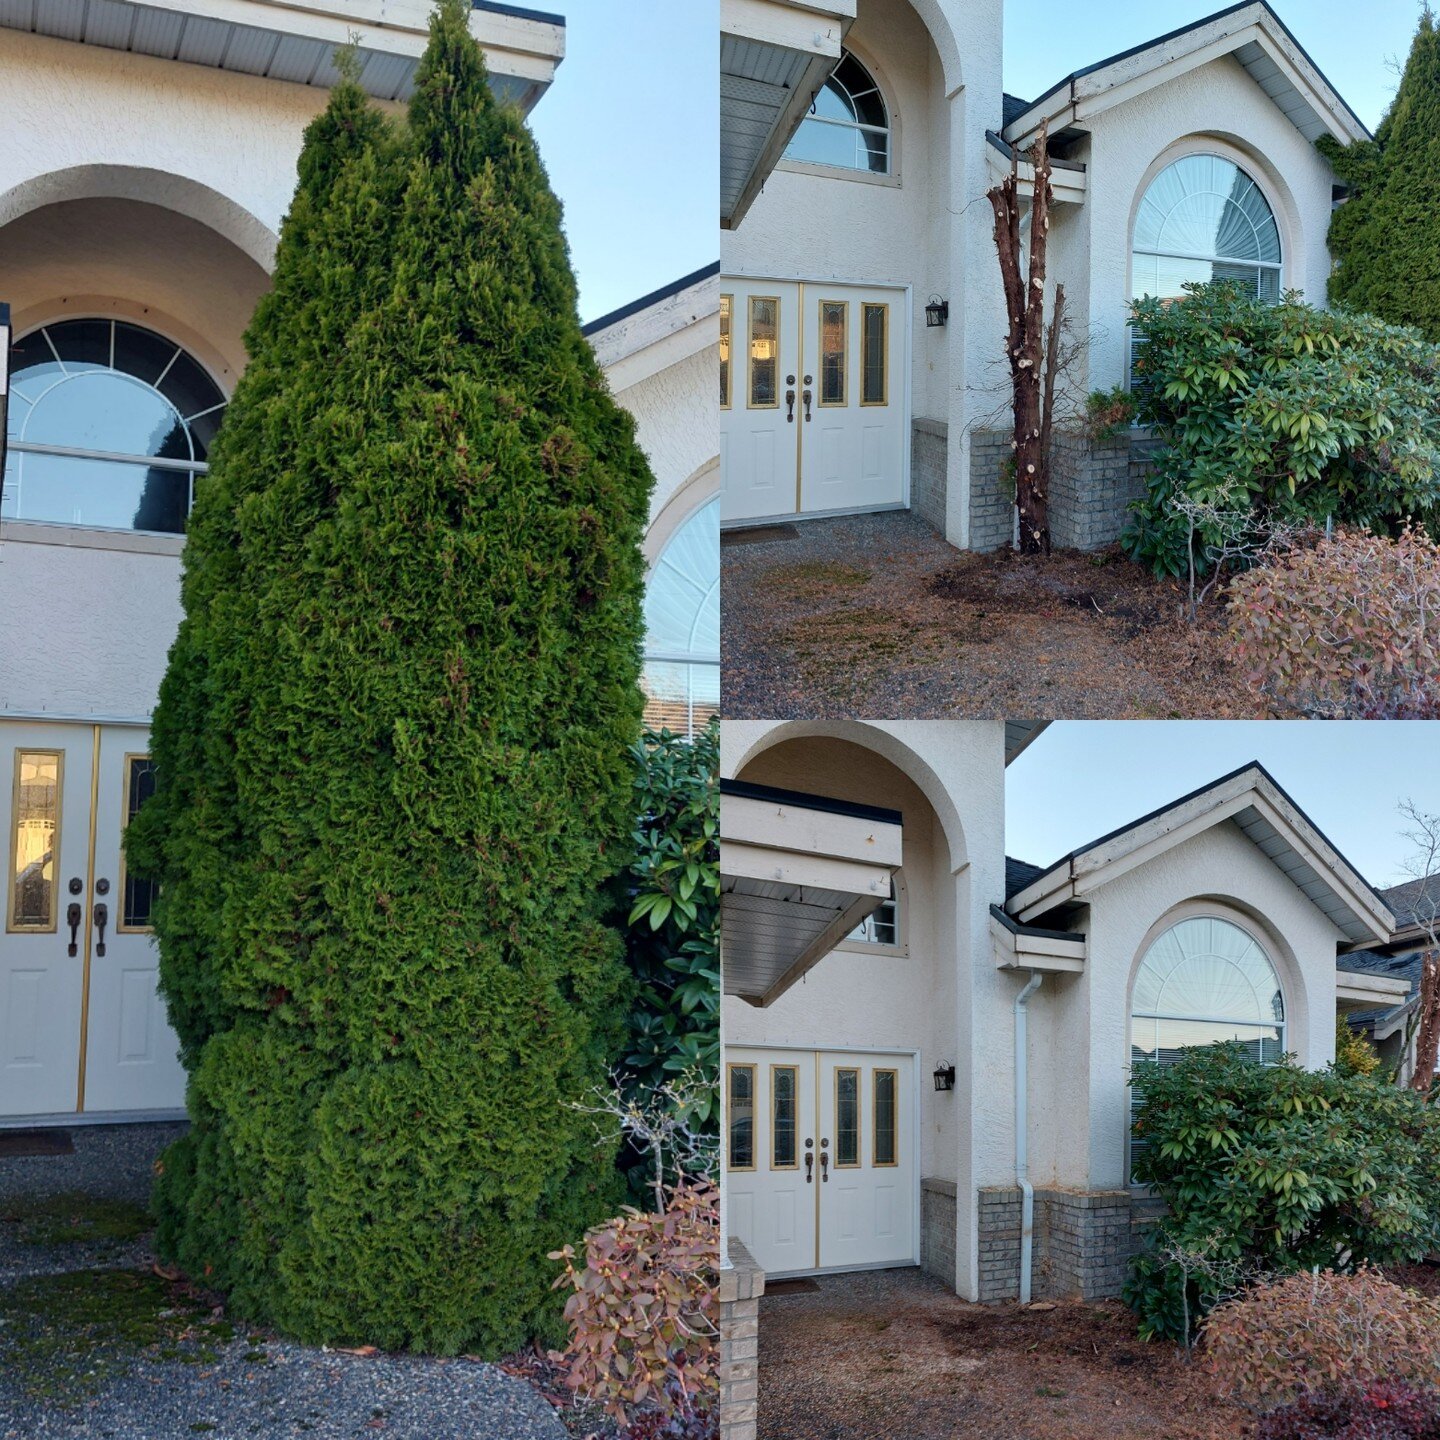 Client requested removal of 2 overgrown decorative trees